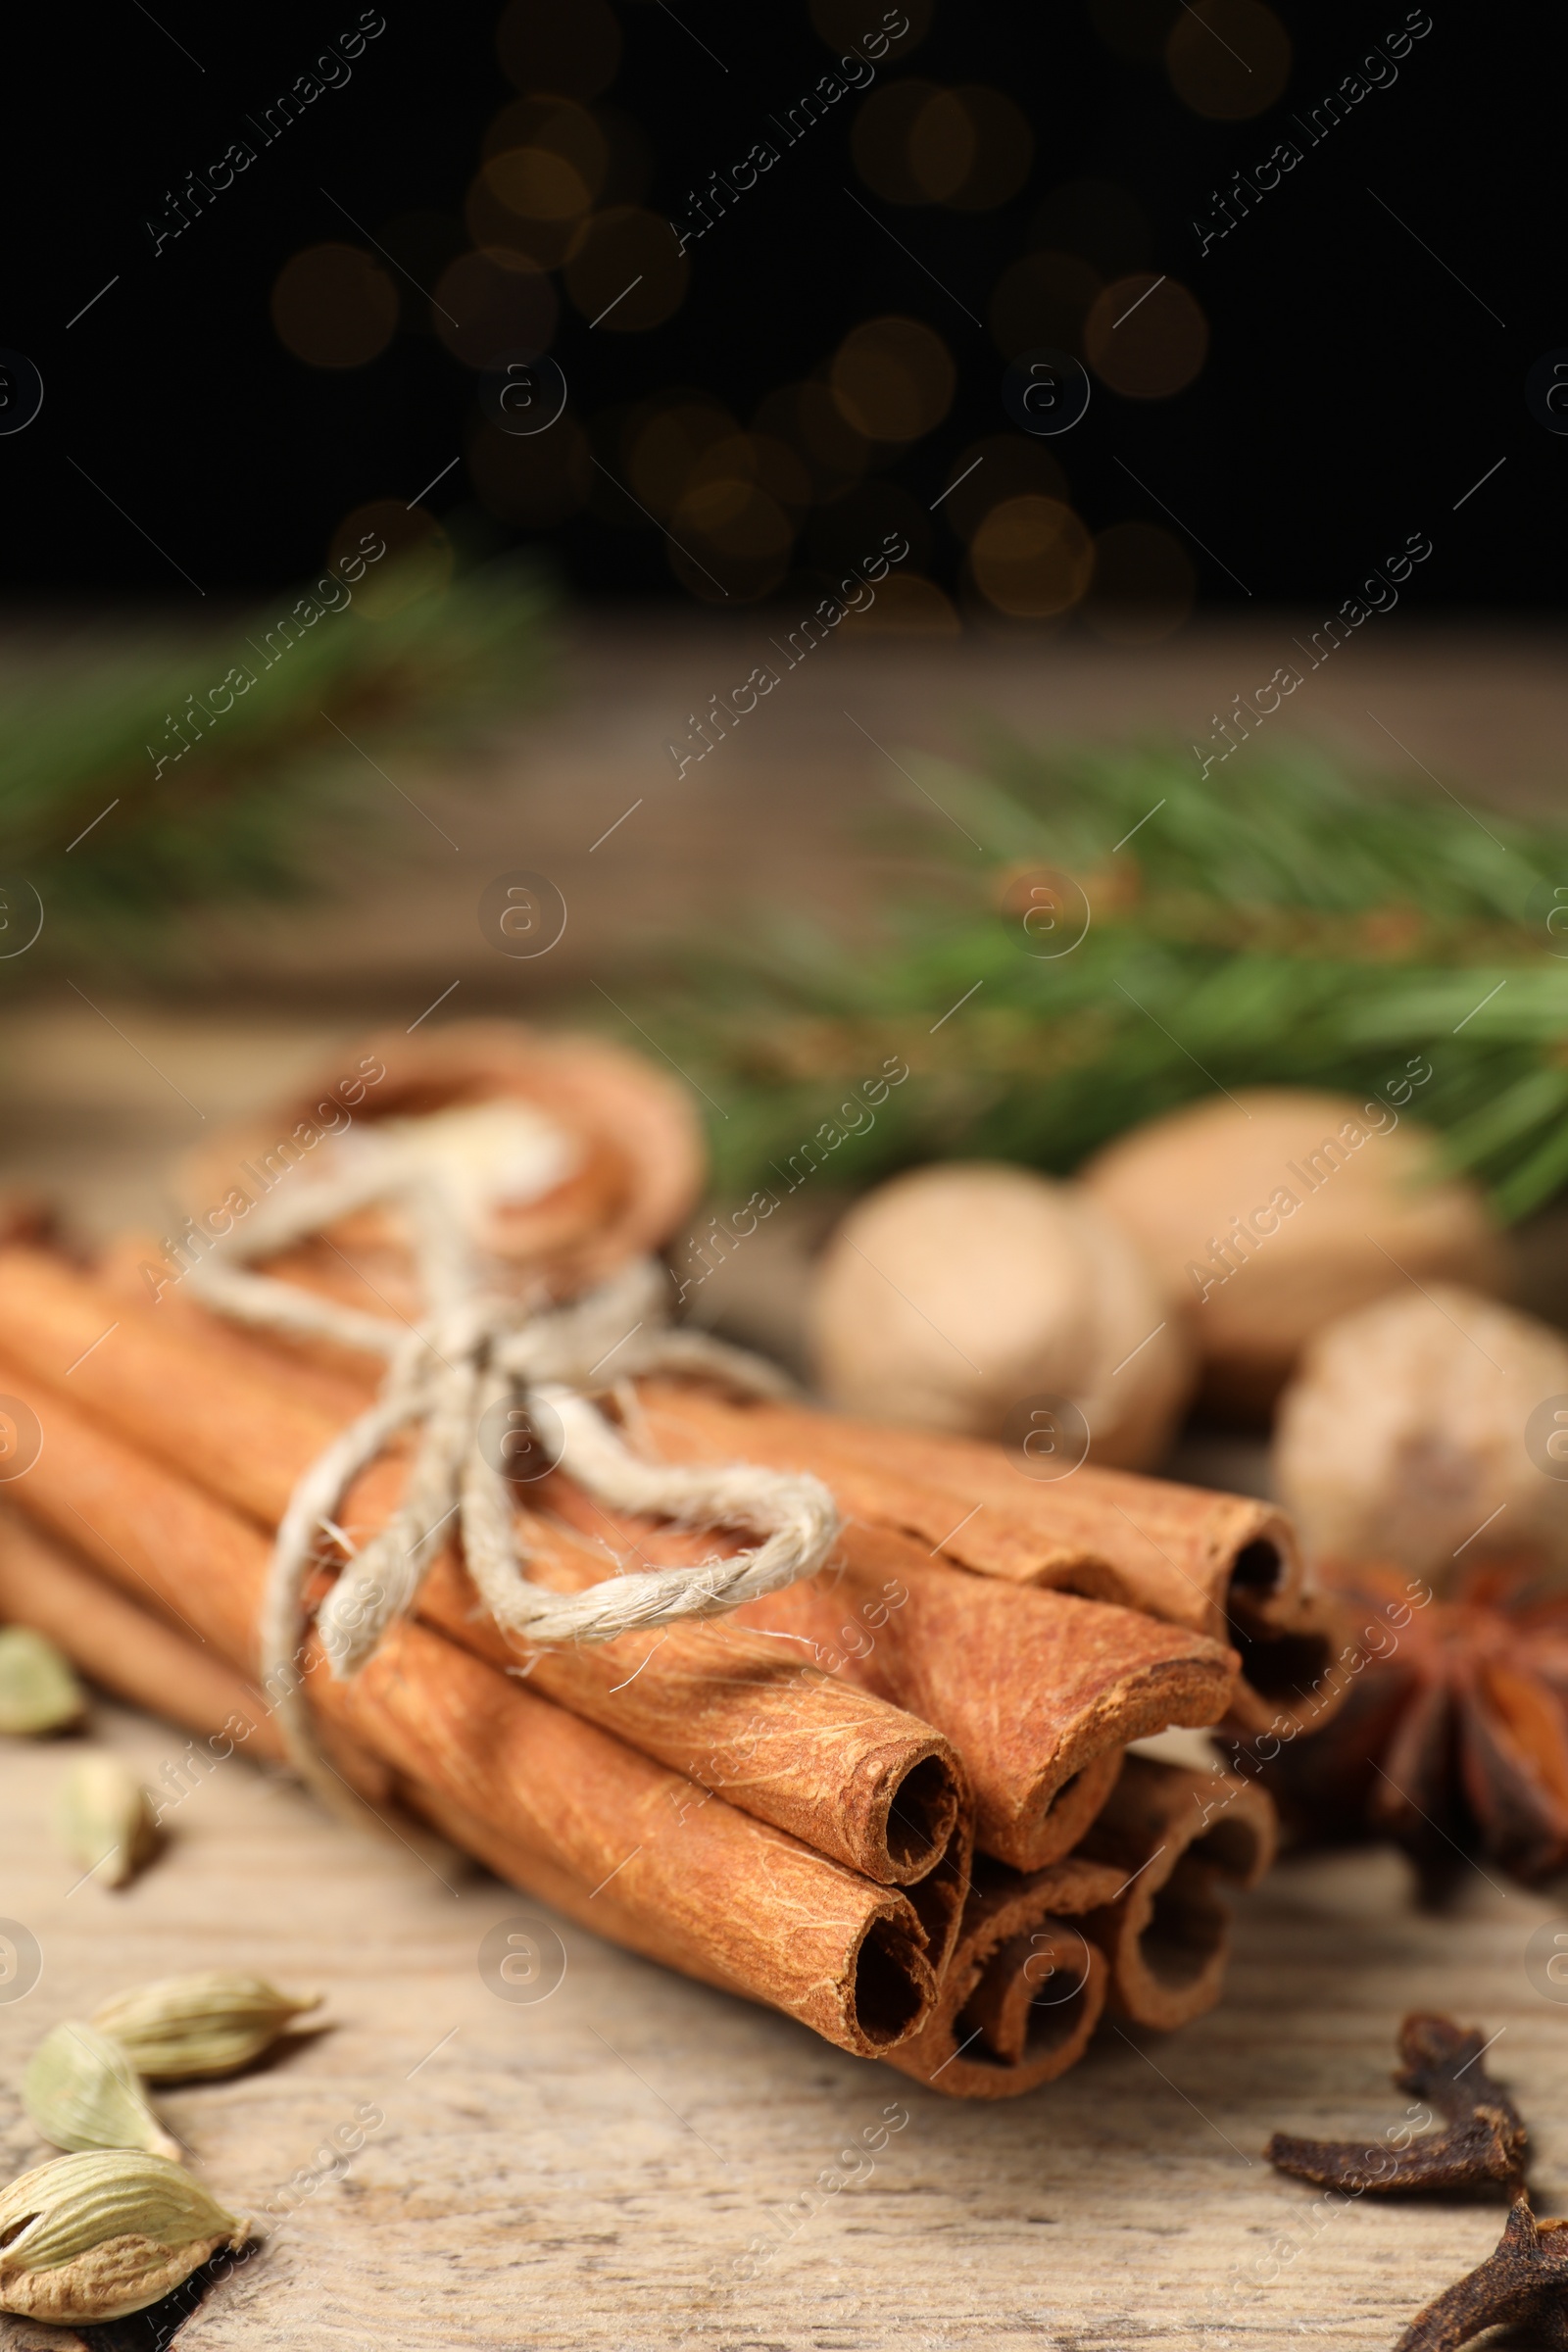 Photo of Cinnamon sticks and other spices on wooden table, closeup